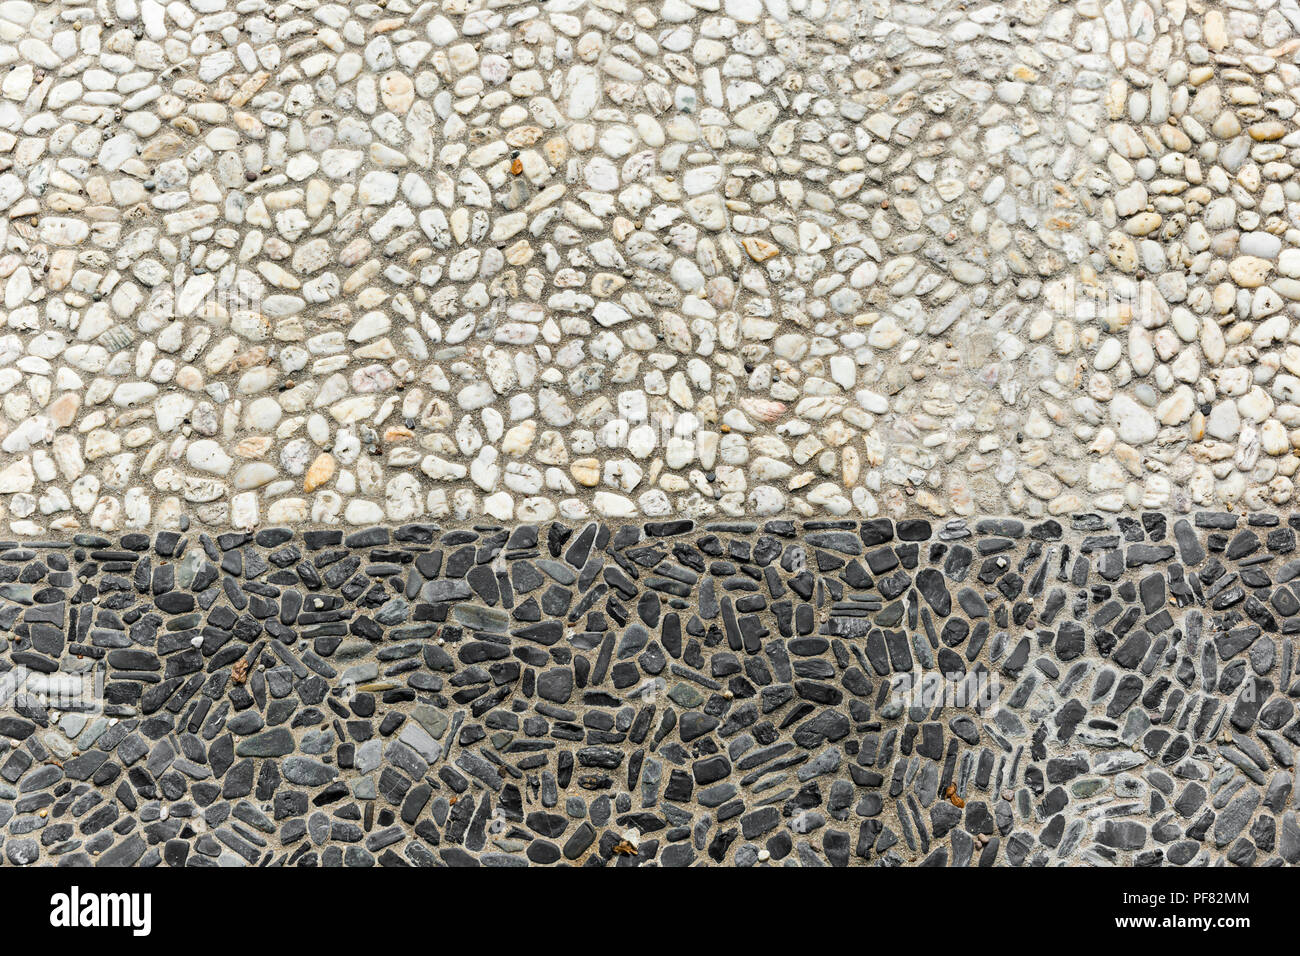 Stones and pebbles mixed together with a definite line through the center. Stock Photo